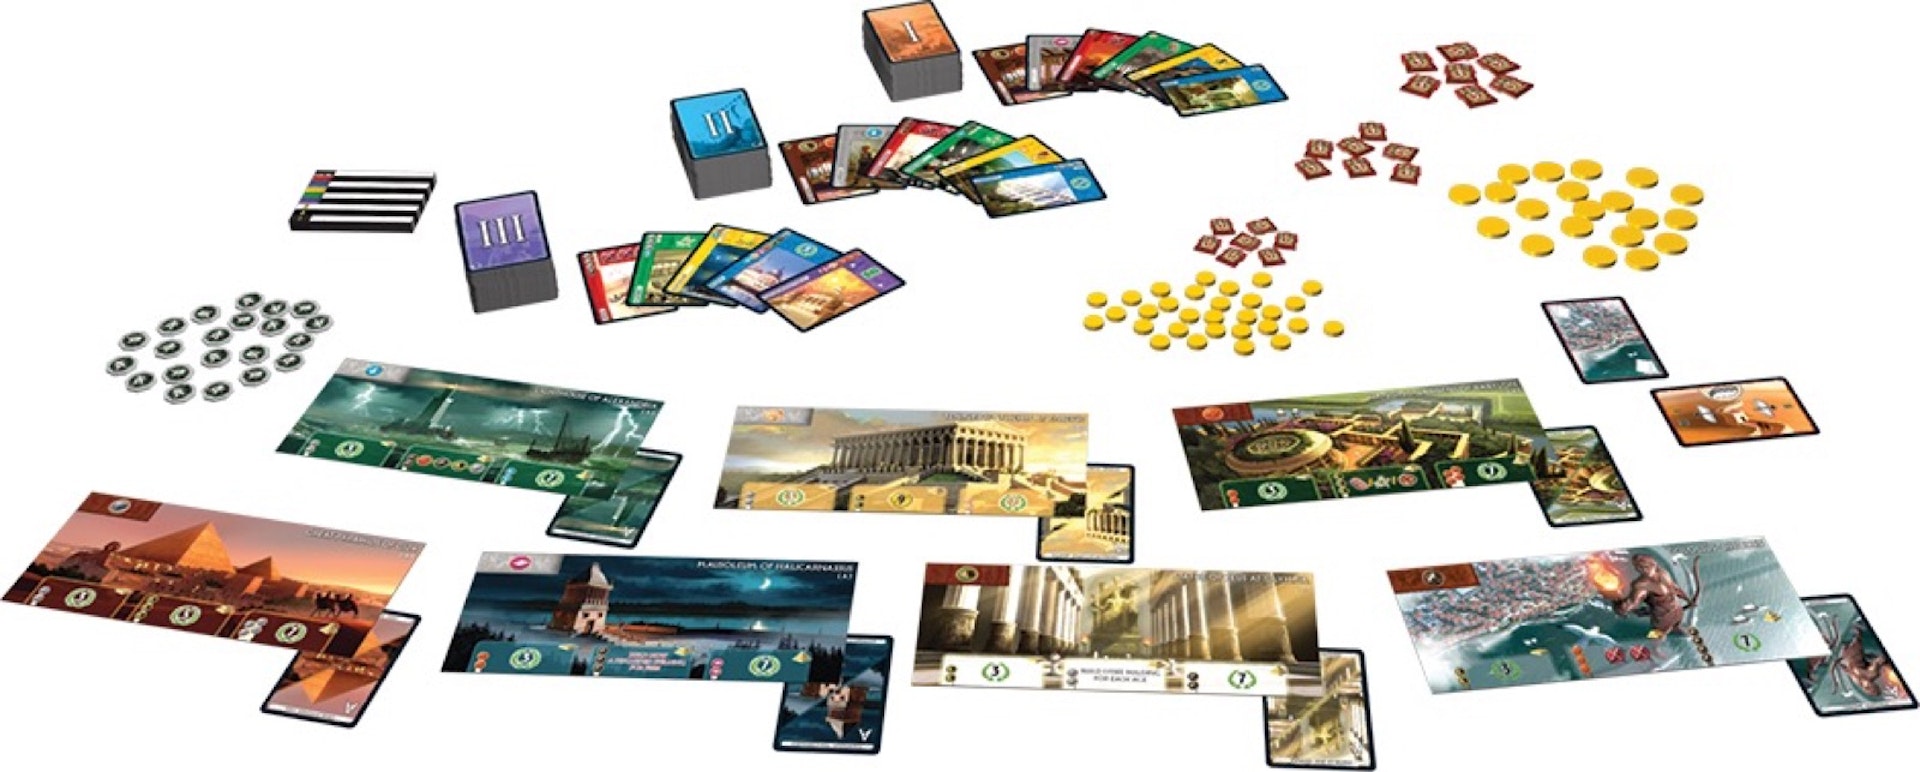 The board game seven wonders is laid out on a white background